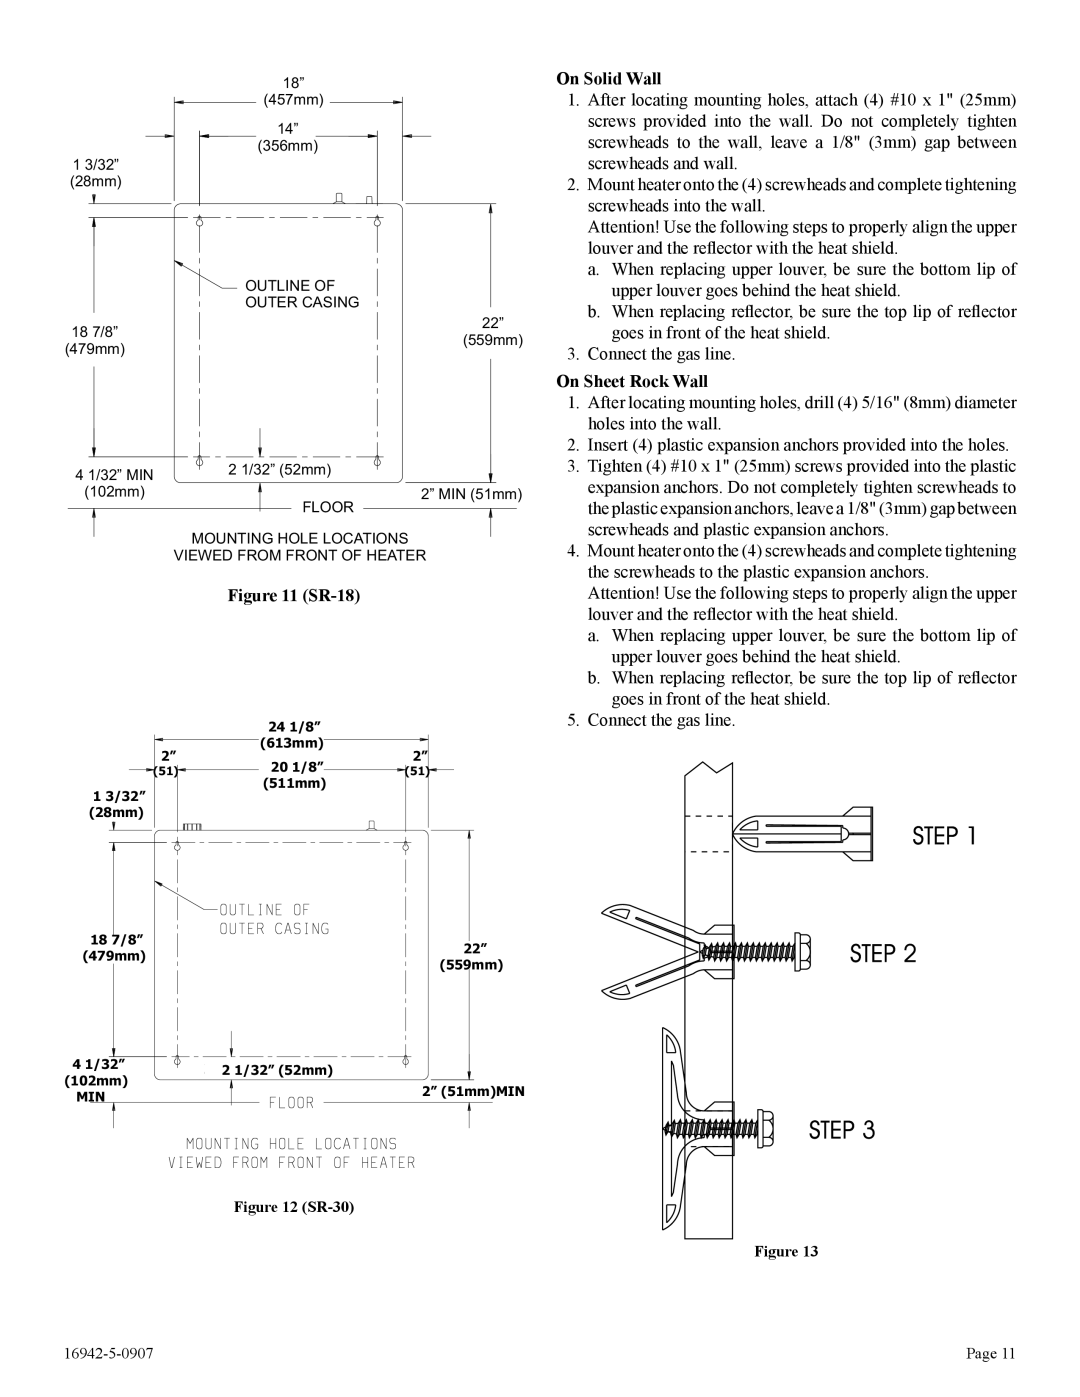 Empire Comfort Systems SR-30 installation instructions SR-18, On Solid Wall, On Sheet Rock Wall 